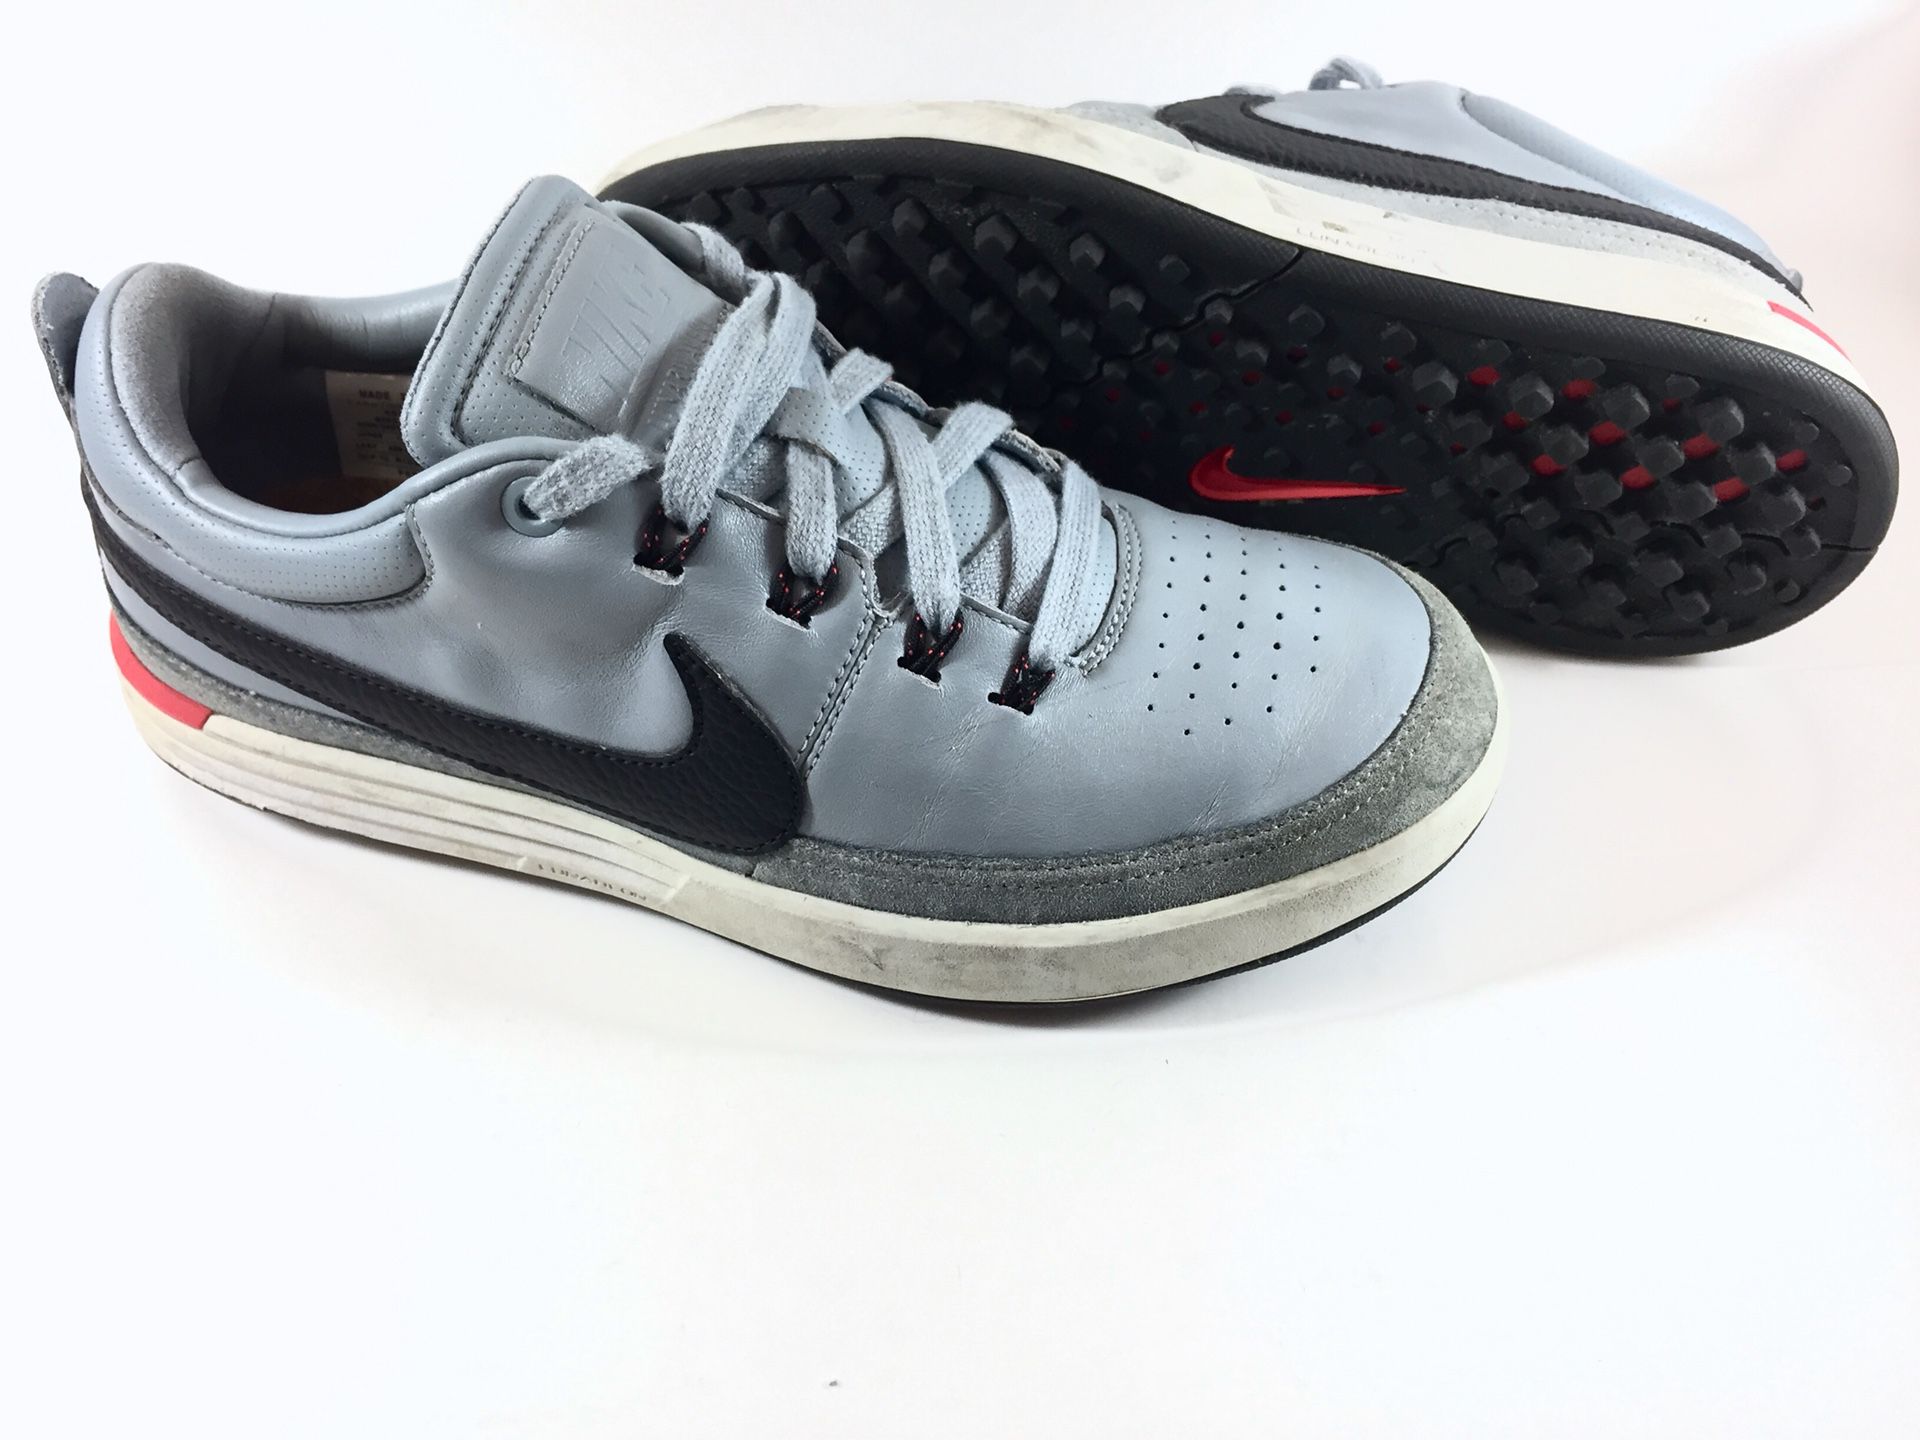 Nike SAMPLE shoes Waverly Spikeless Golf Mens Size 7 Sale in OR - OfferUp